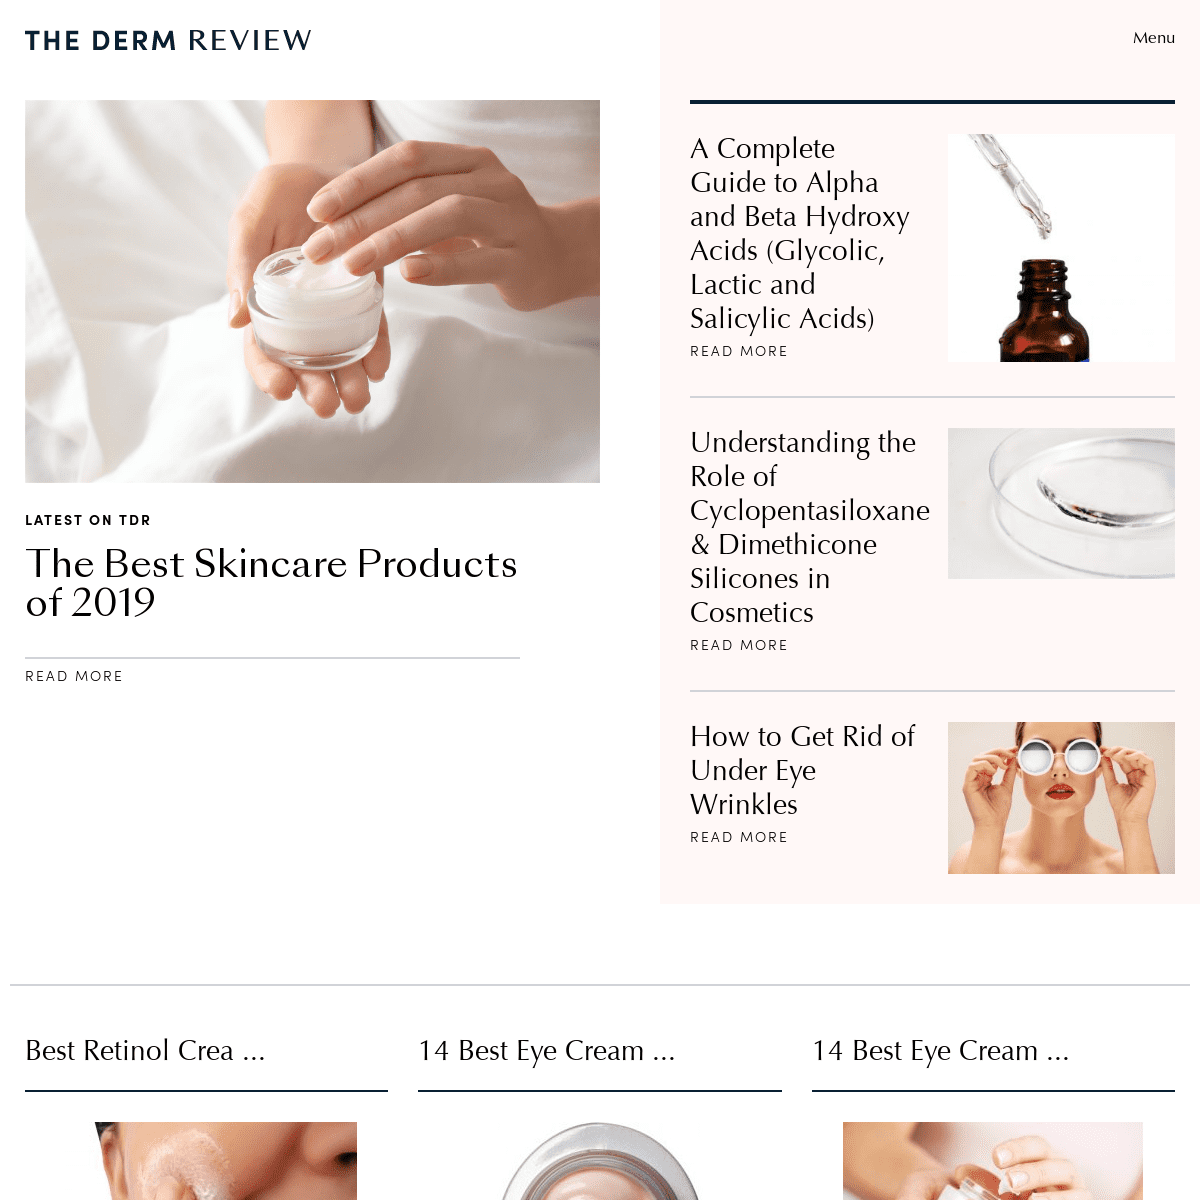 A complete backup of thedermreview.com